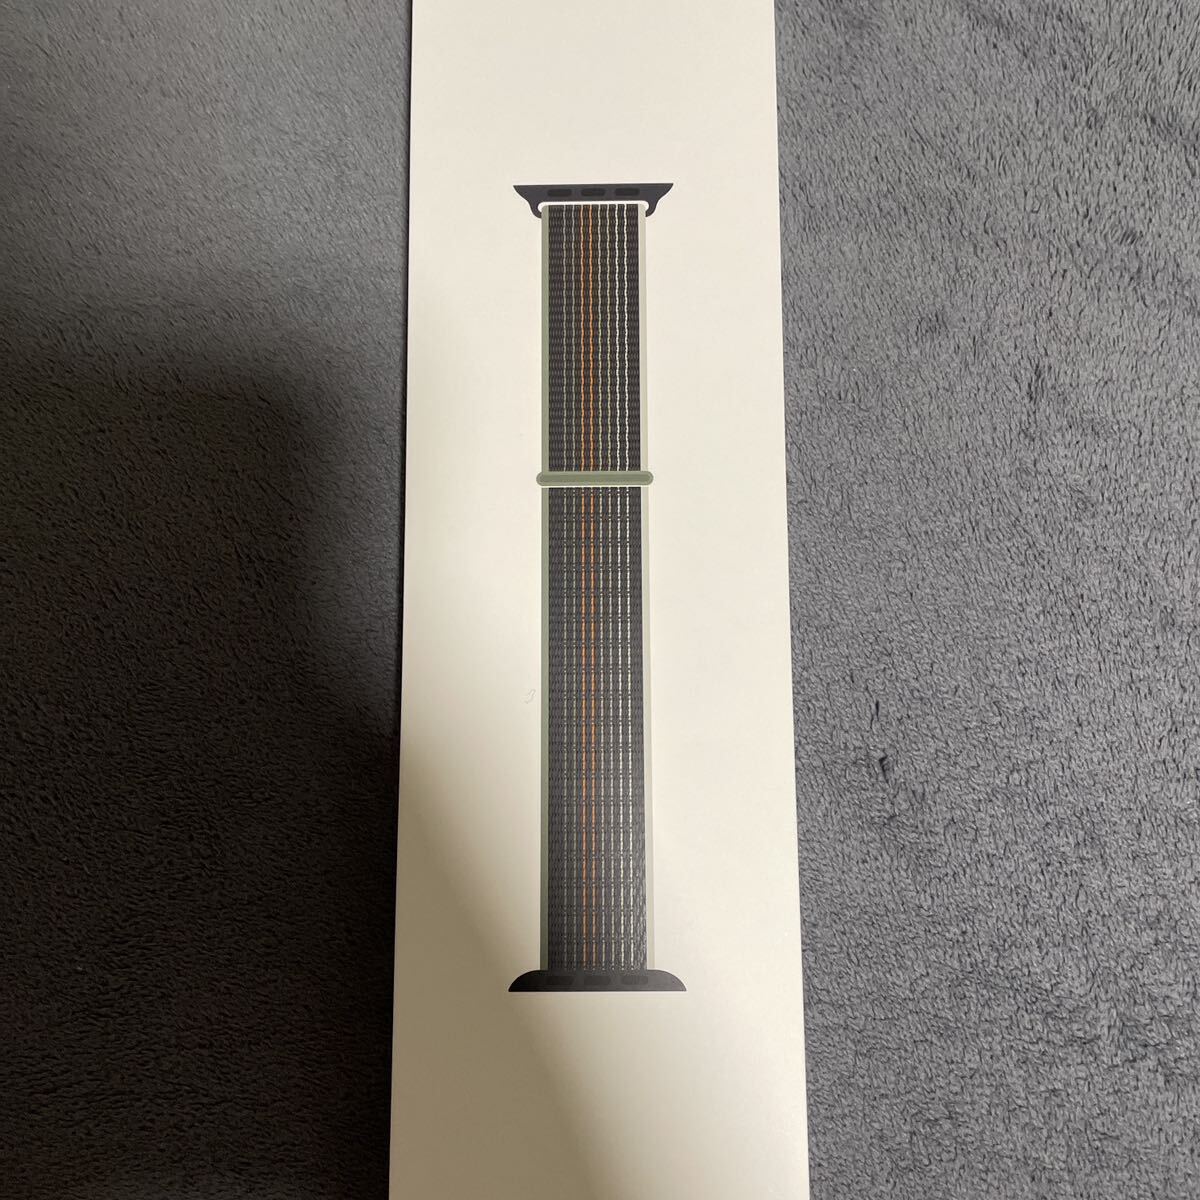 [Apple Apple ] Watch 41mm case for midnight sport loop band 